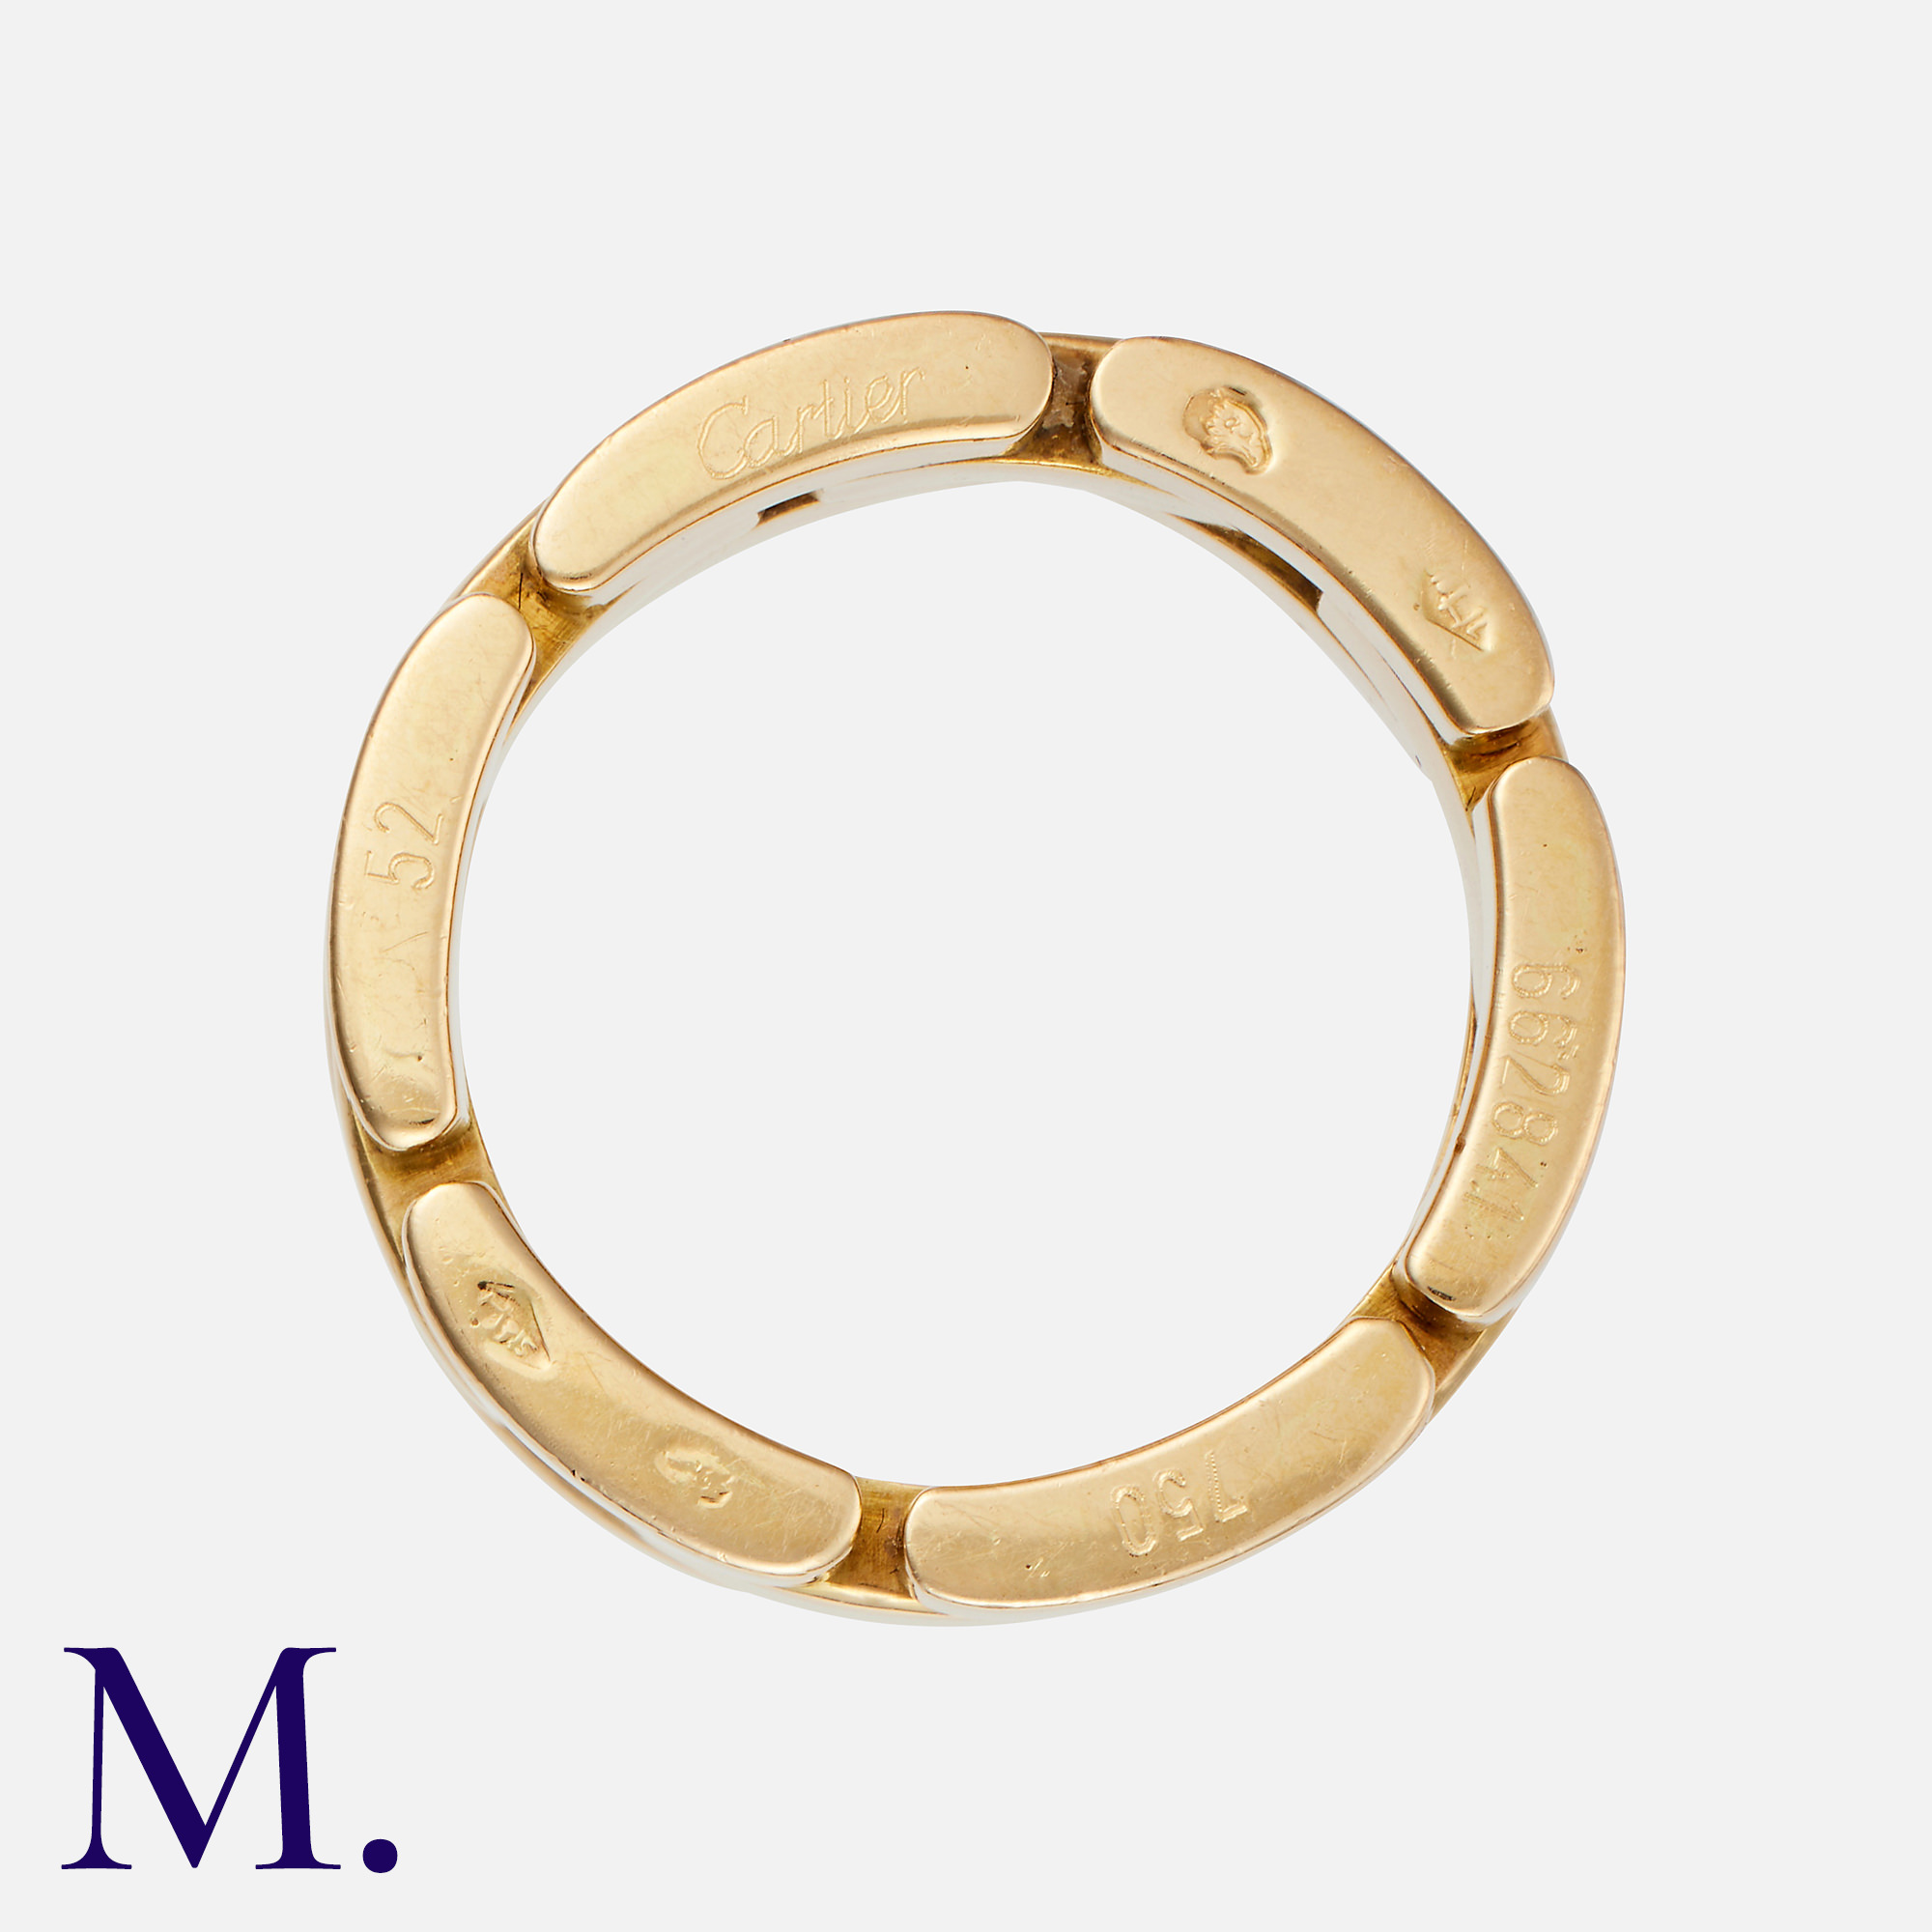 CARTIER. A Maillon Panthère Ring in 18K yellow gold. Signed Cartier and serial numbered. Size: L-M - Image 3 of 3